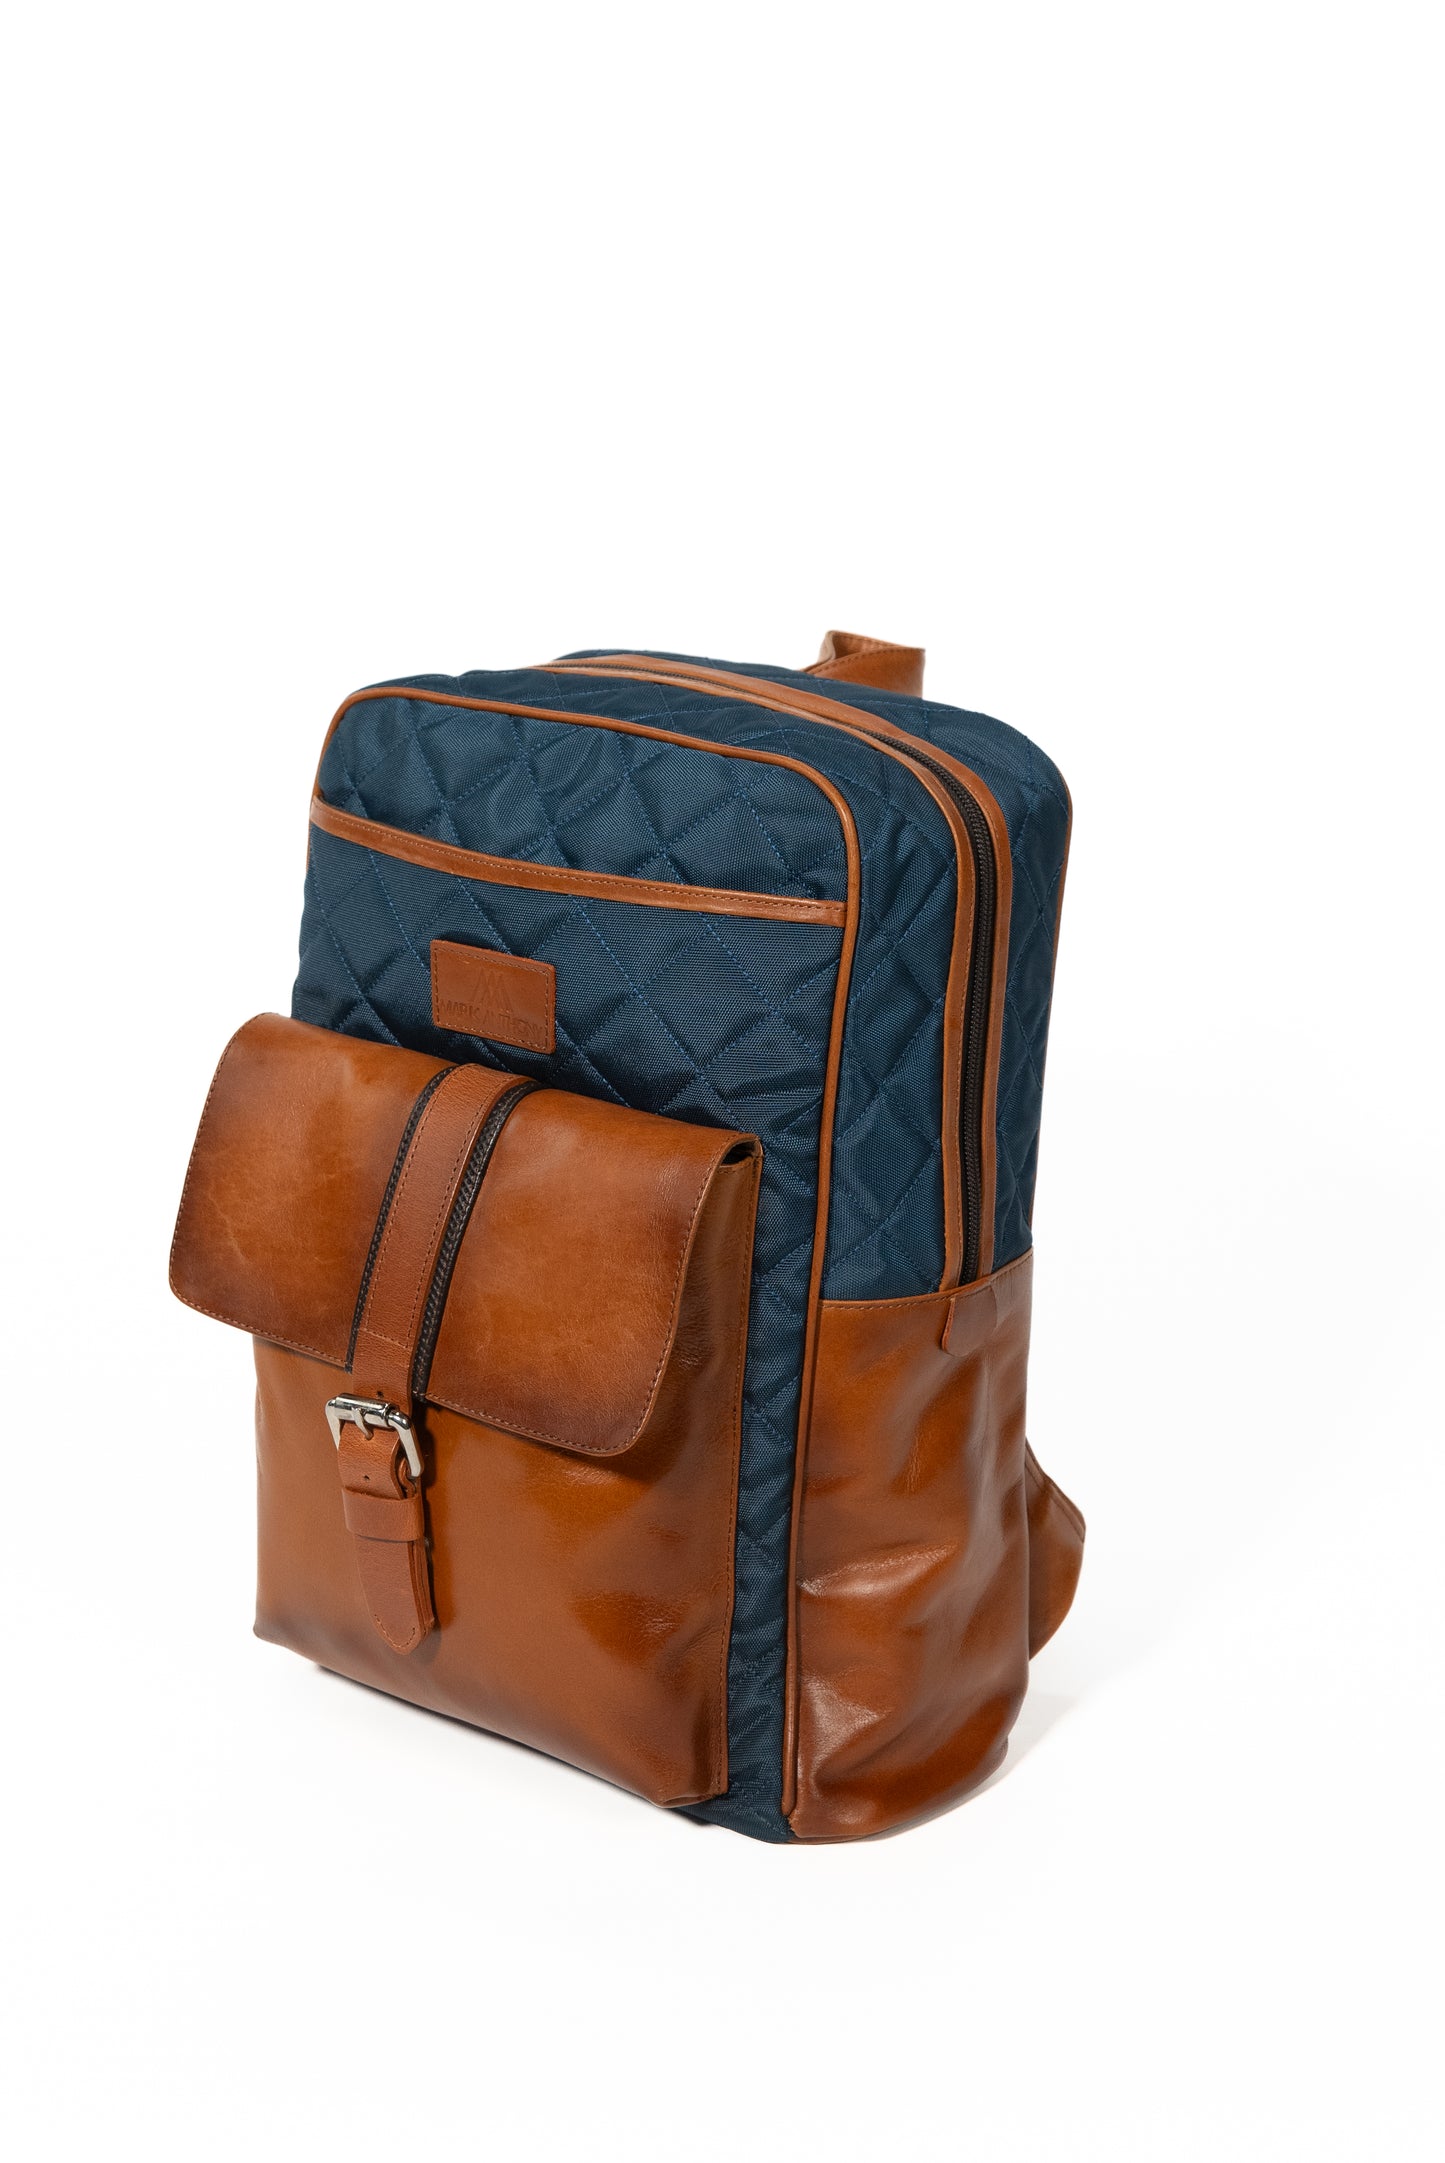 The Milan Backpack